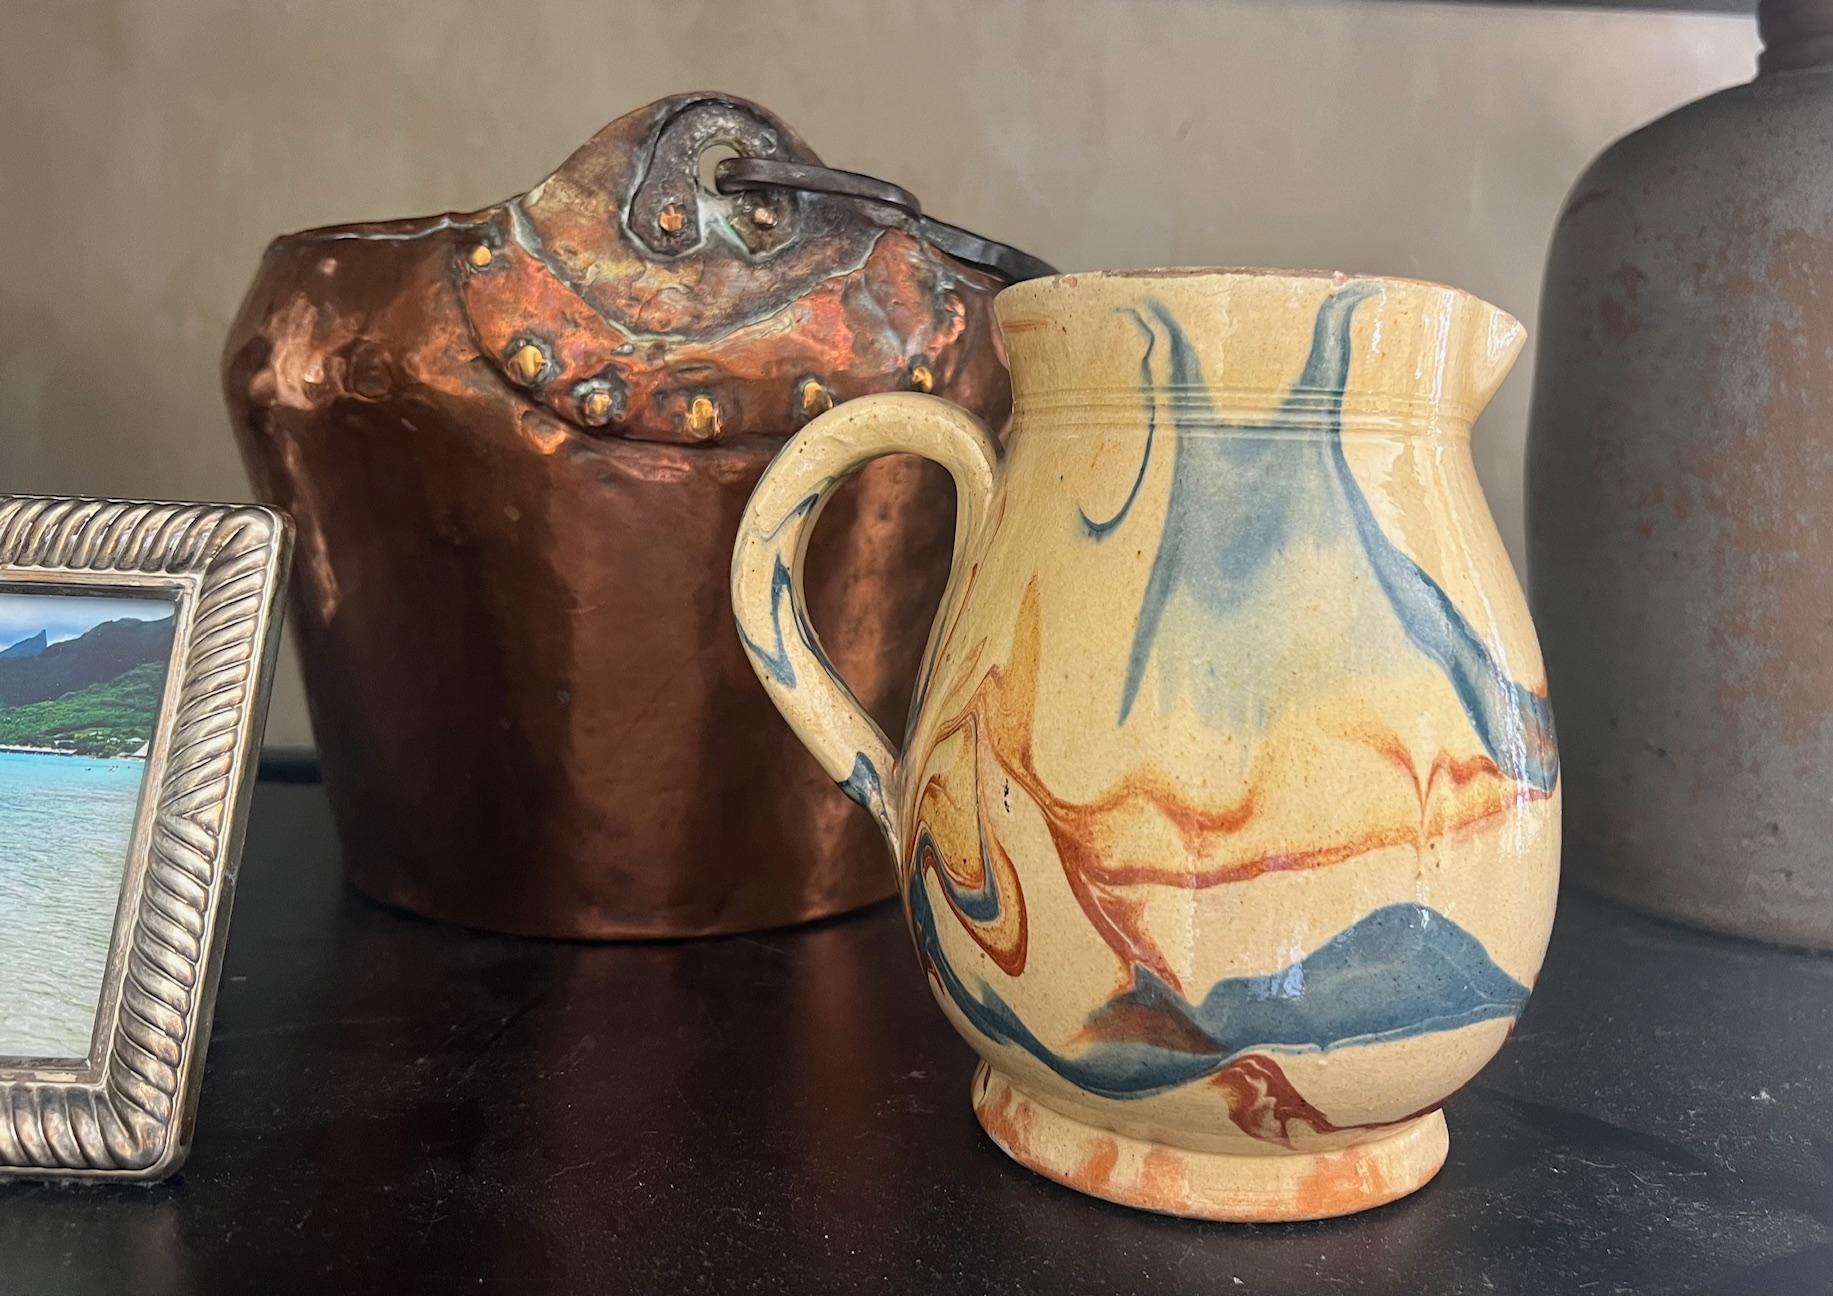 Jaspe terracotta glazed ceramic country pitcher with a background of butter yellow with a swirl pattern of blue and burnt umber. Made in the Savoie region of France toward the end of the 19th Century.

Jaspe pottery is typically marble-like swirls